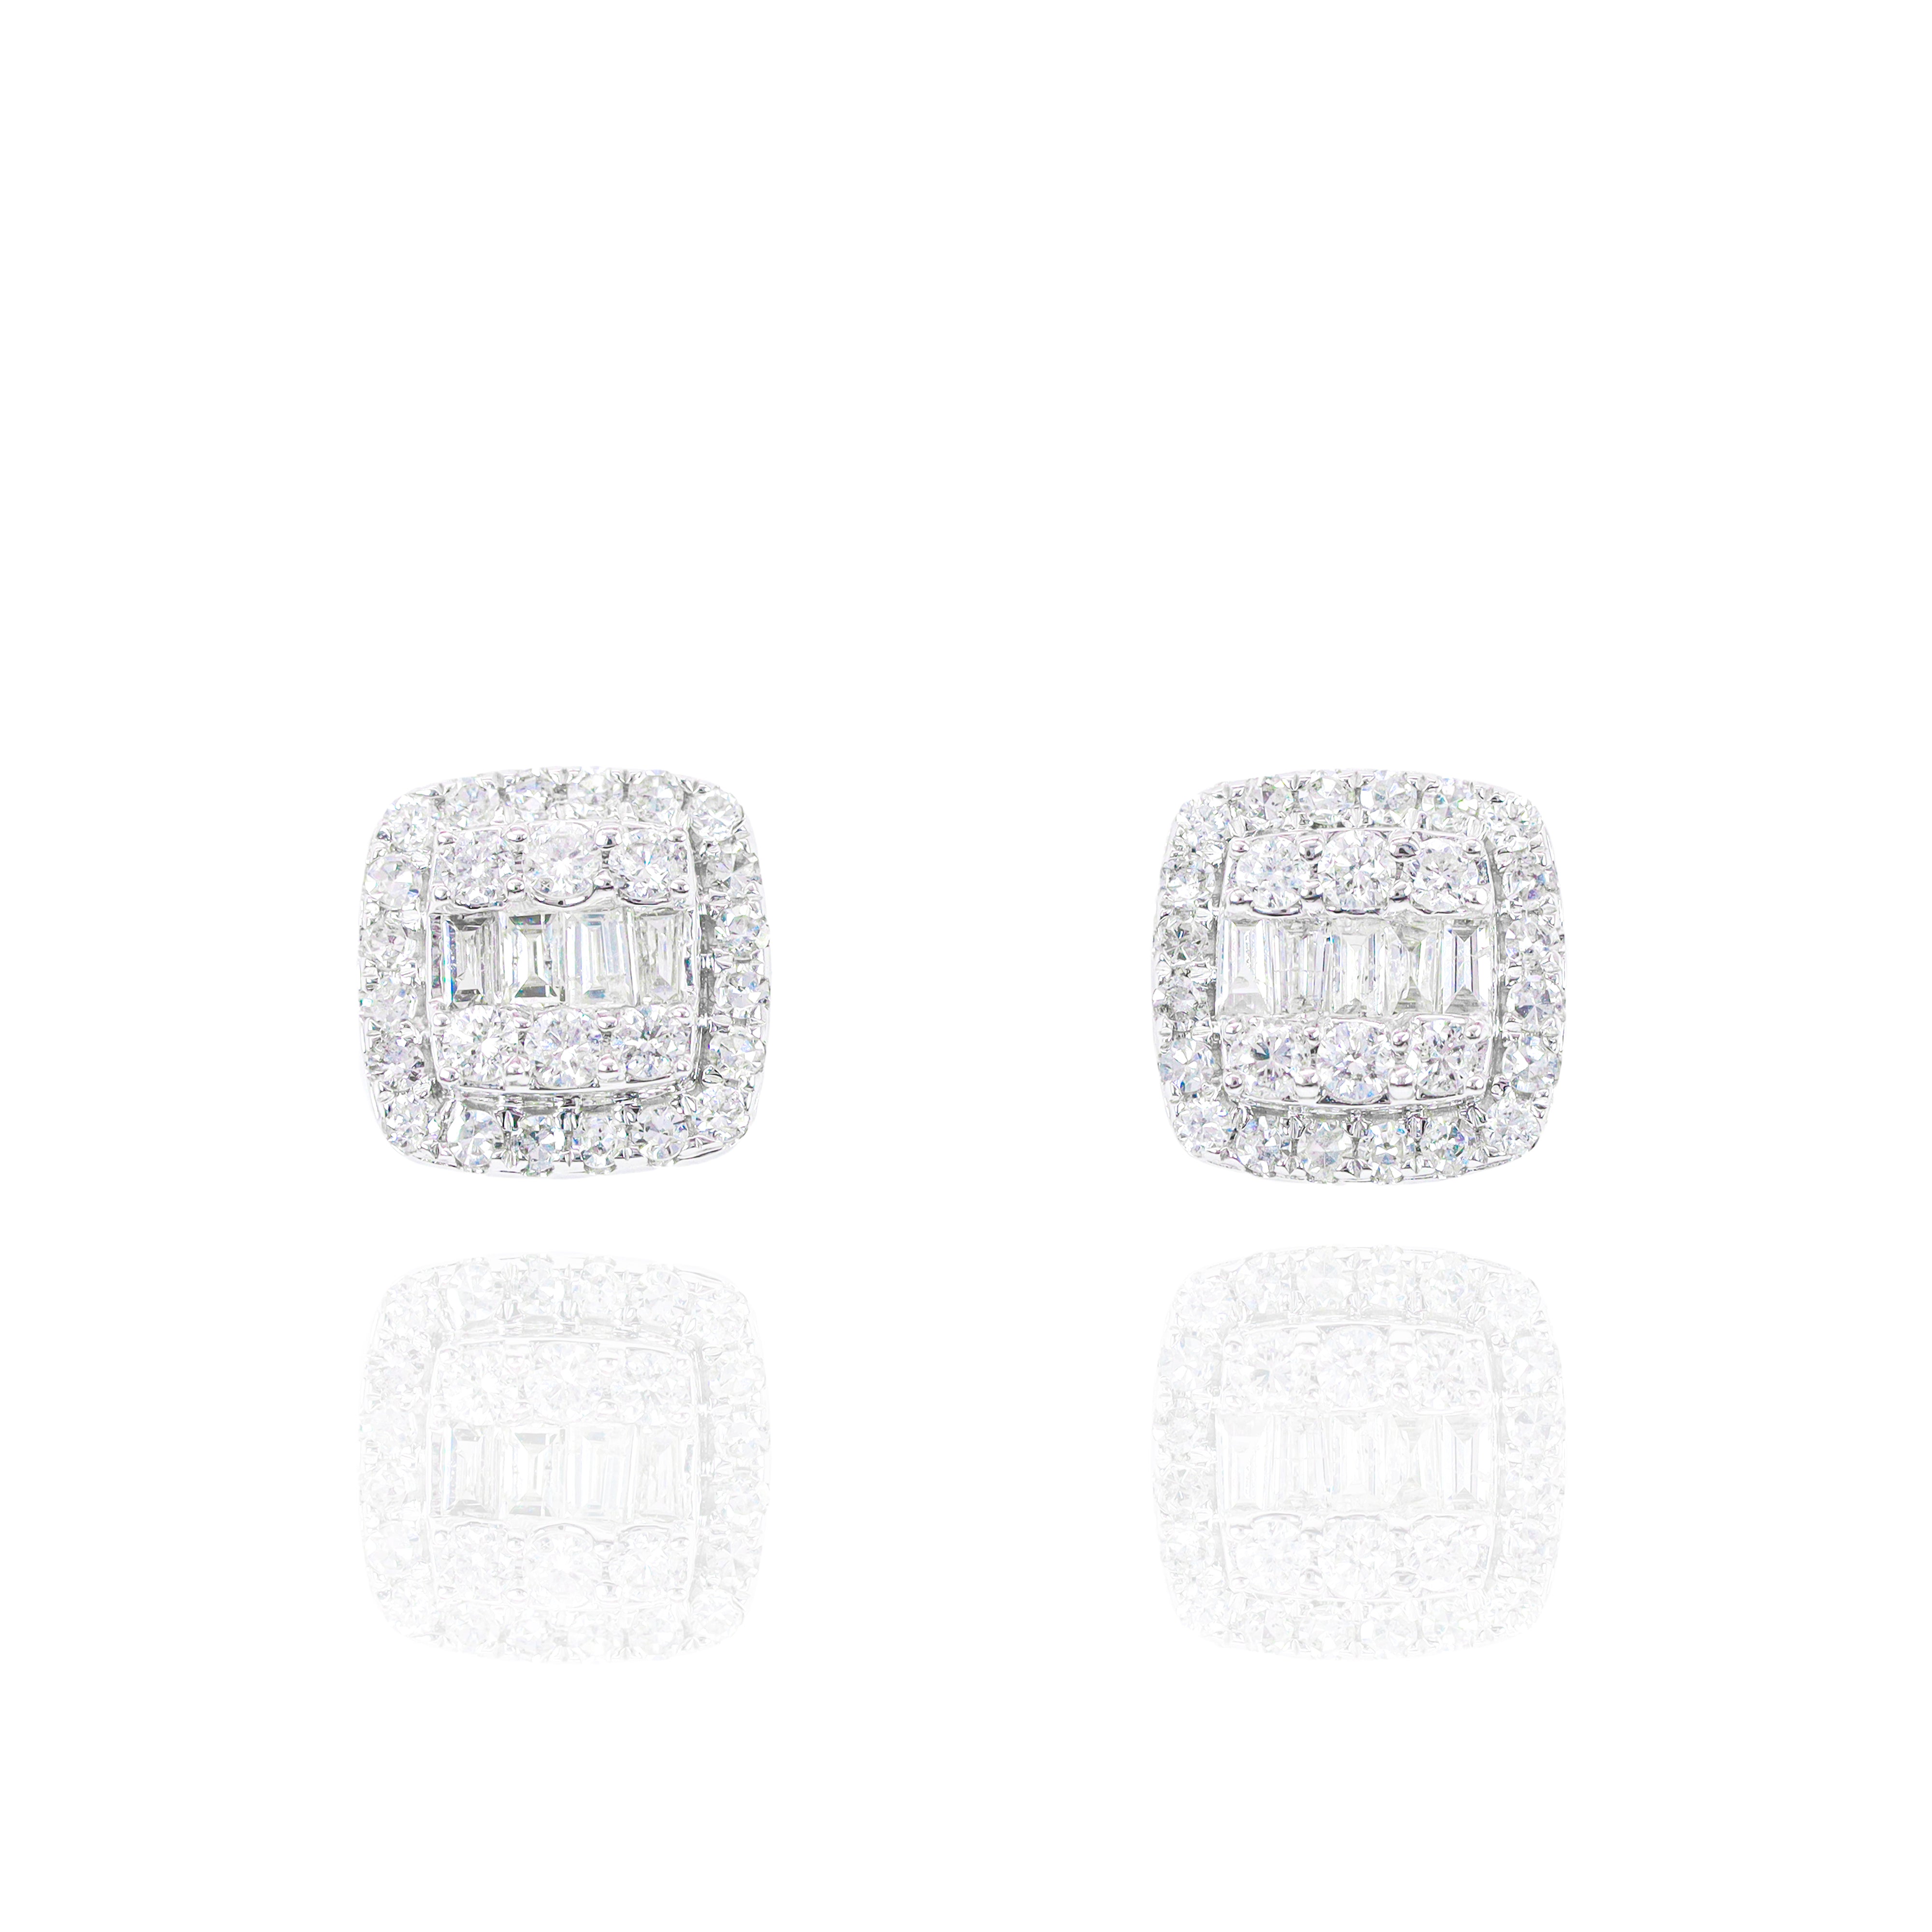 Middle Baguette with Two Row Diamond Border Earrings